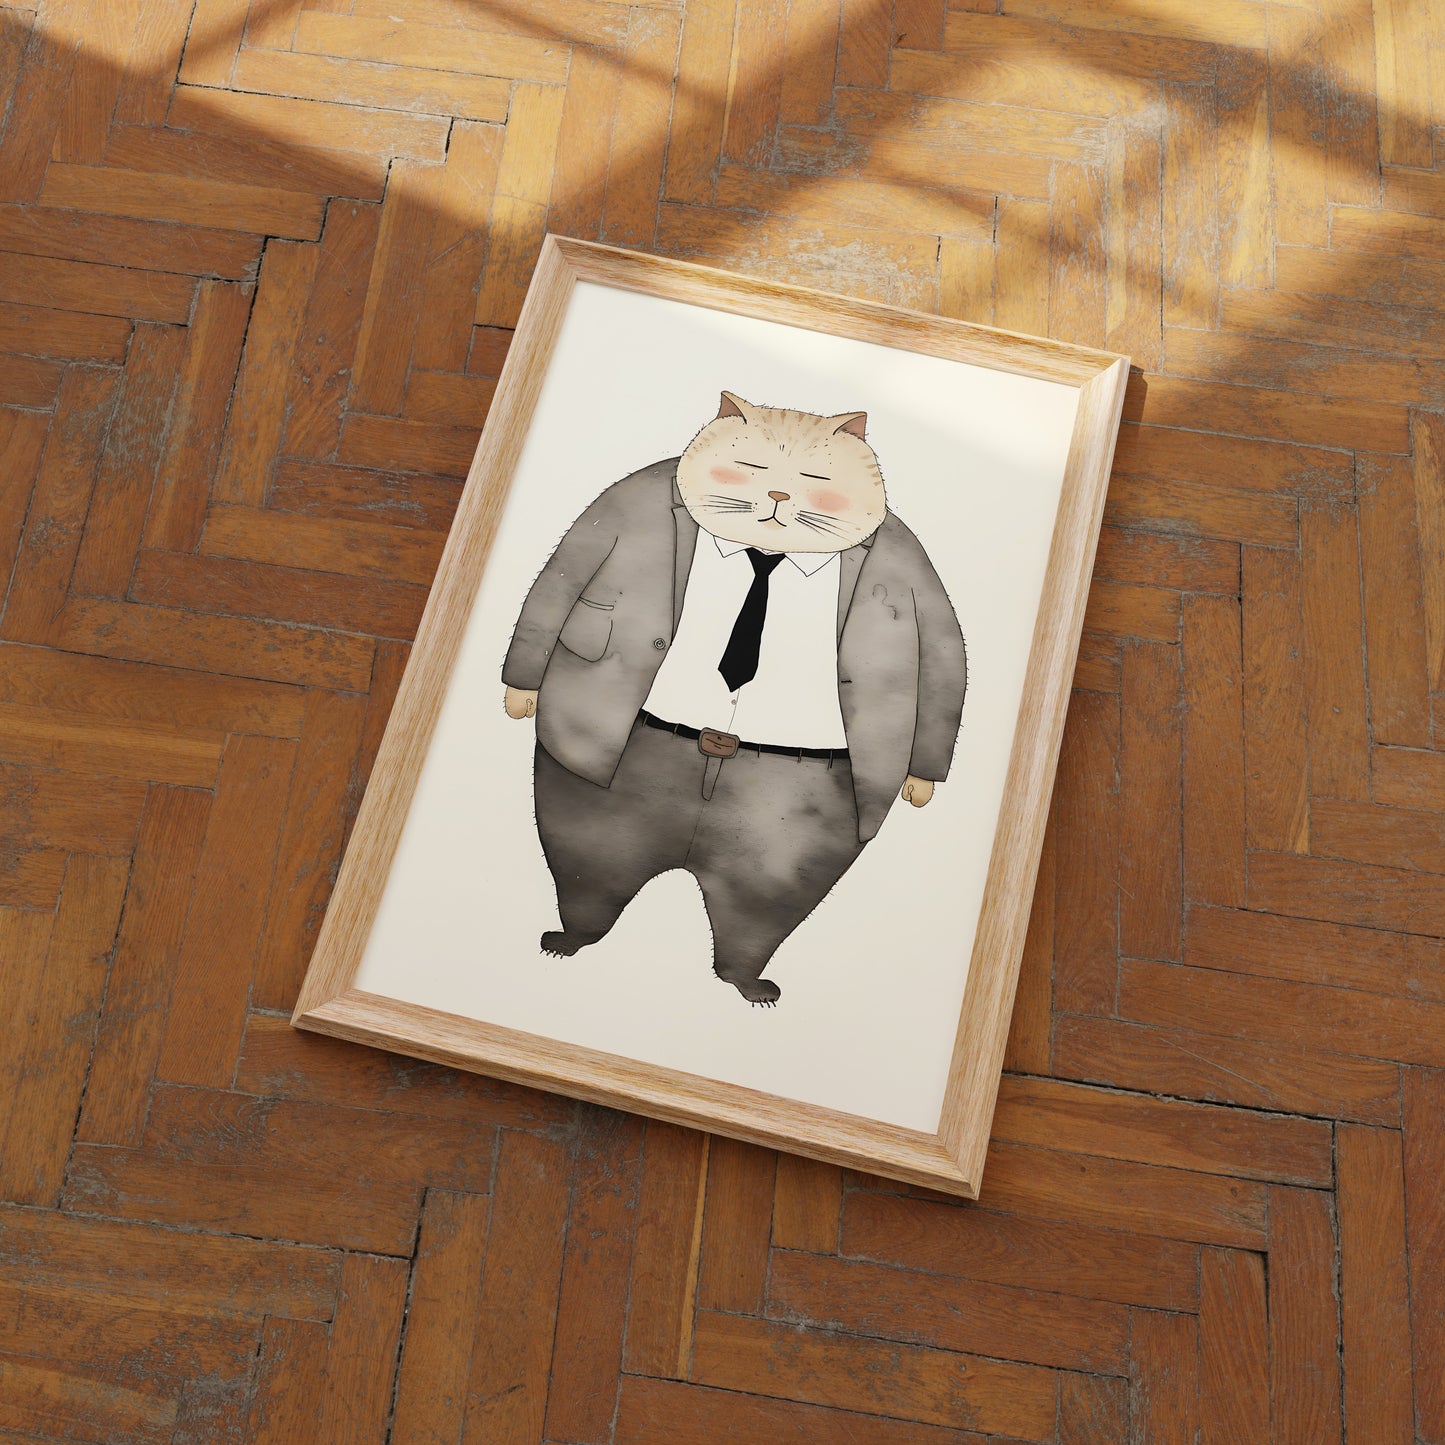 Illustration of a cat in a suit and tie, displayed in a frame on a wooden floor.